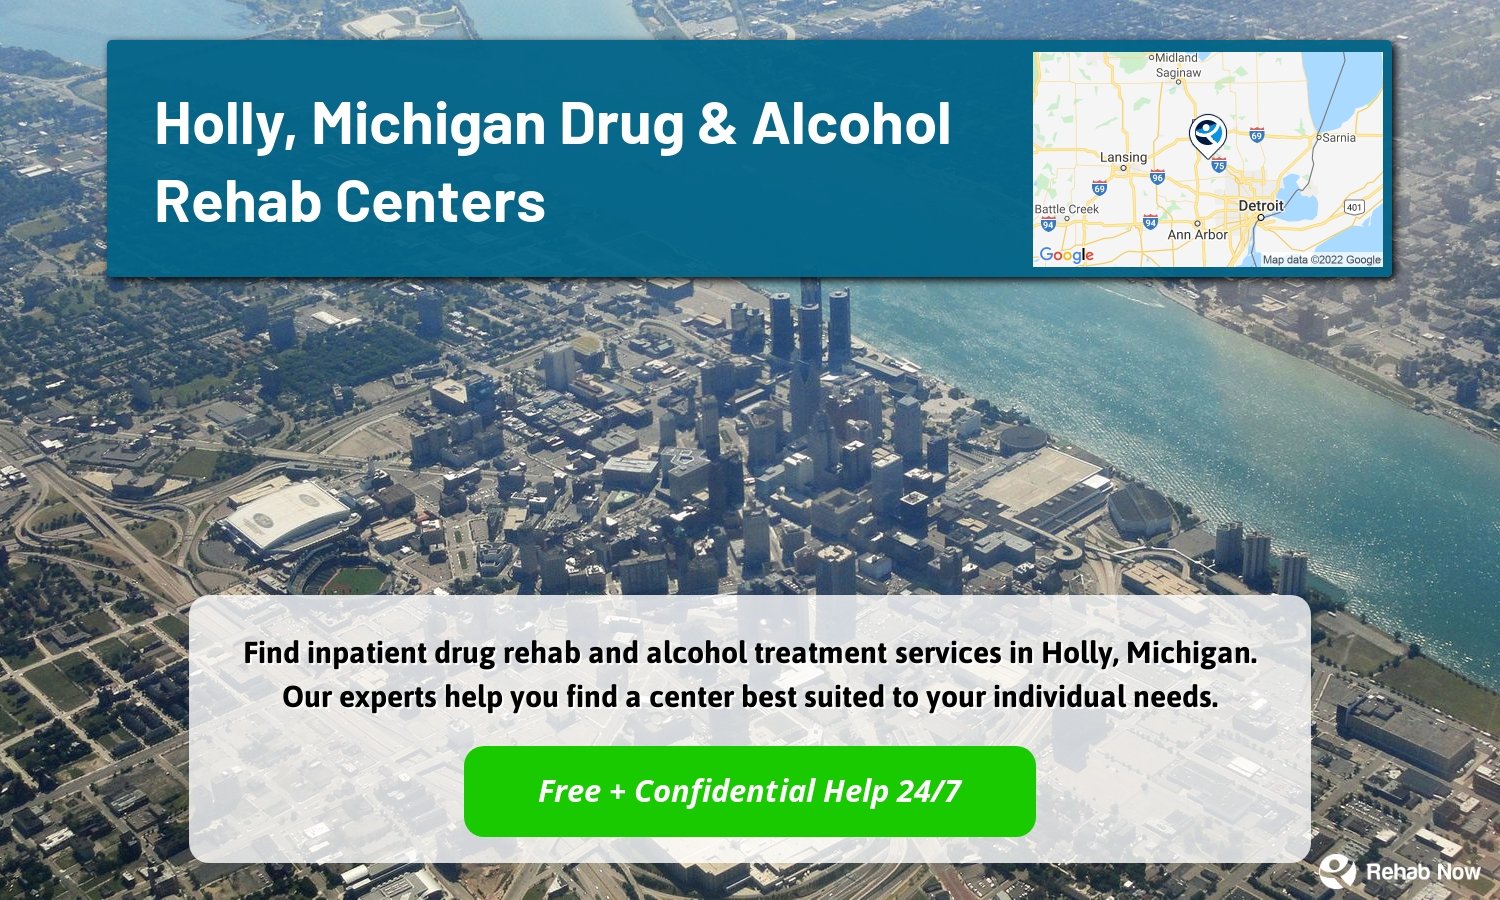 Find inpatient drug rehab and alcohol treatment services in Holly, Michigan. Our experts help you find a center best suited to your individual needs.